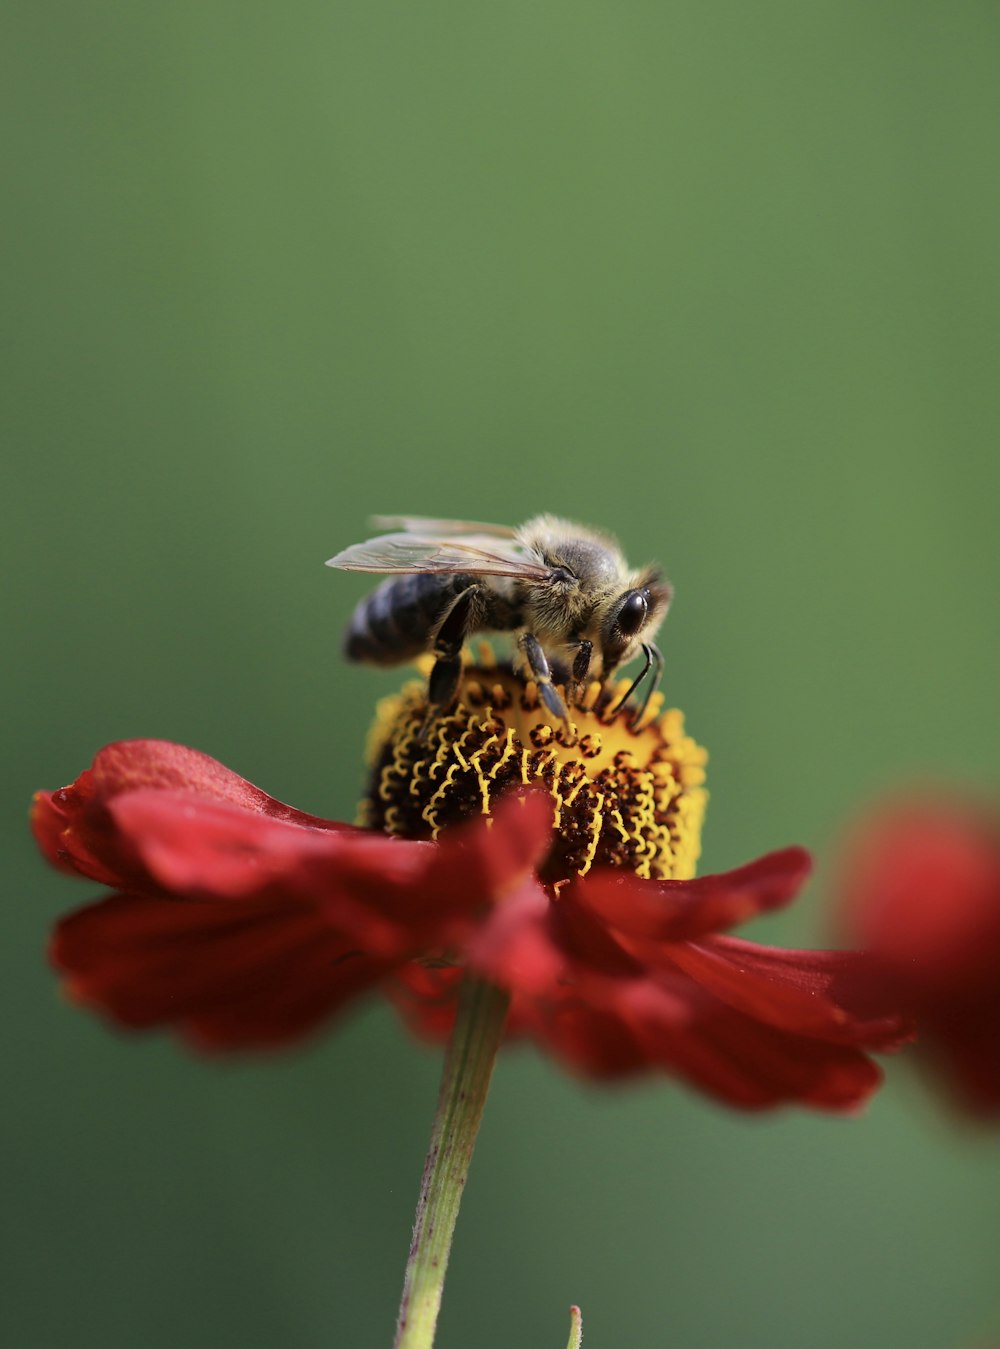 honeybee perched on red petaled flower in close up photography during daytime